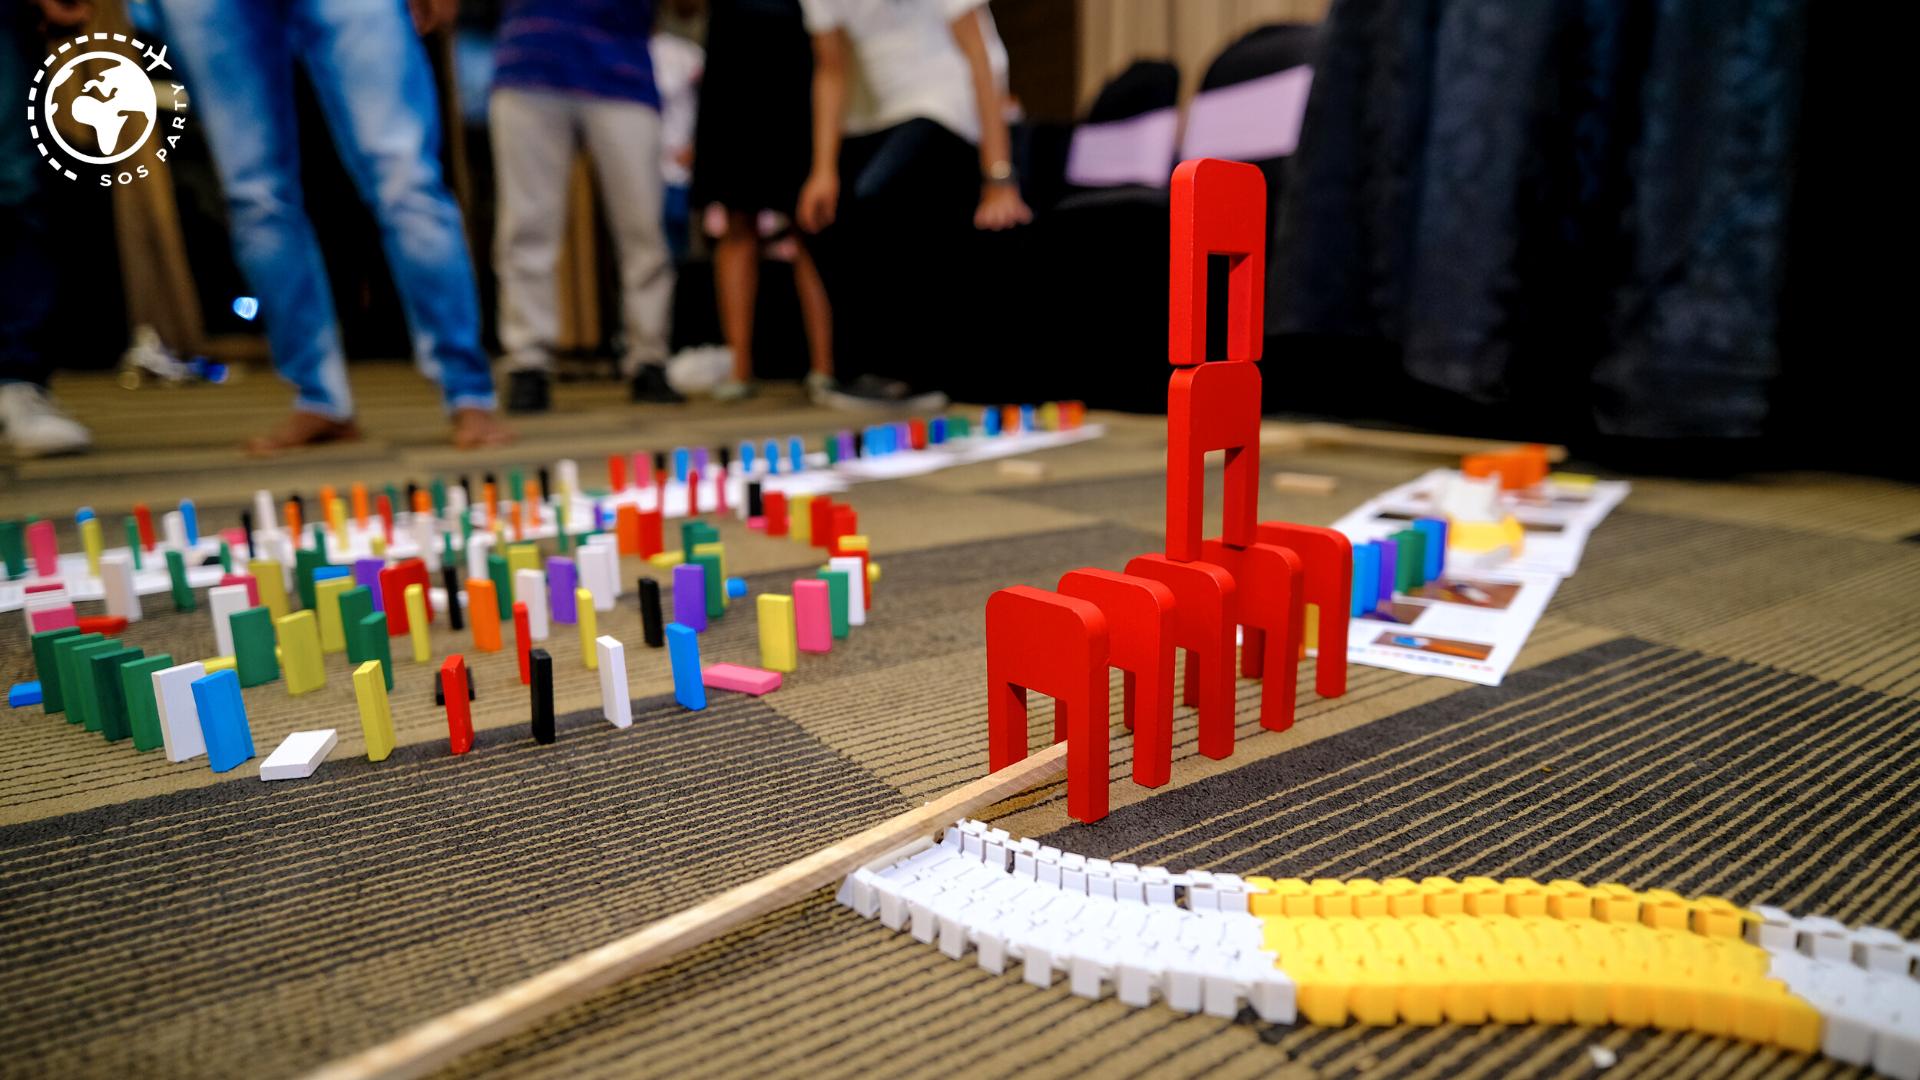 The Domino Effect - Chain Reaction Team Building Activity